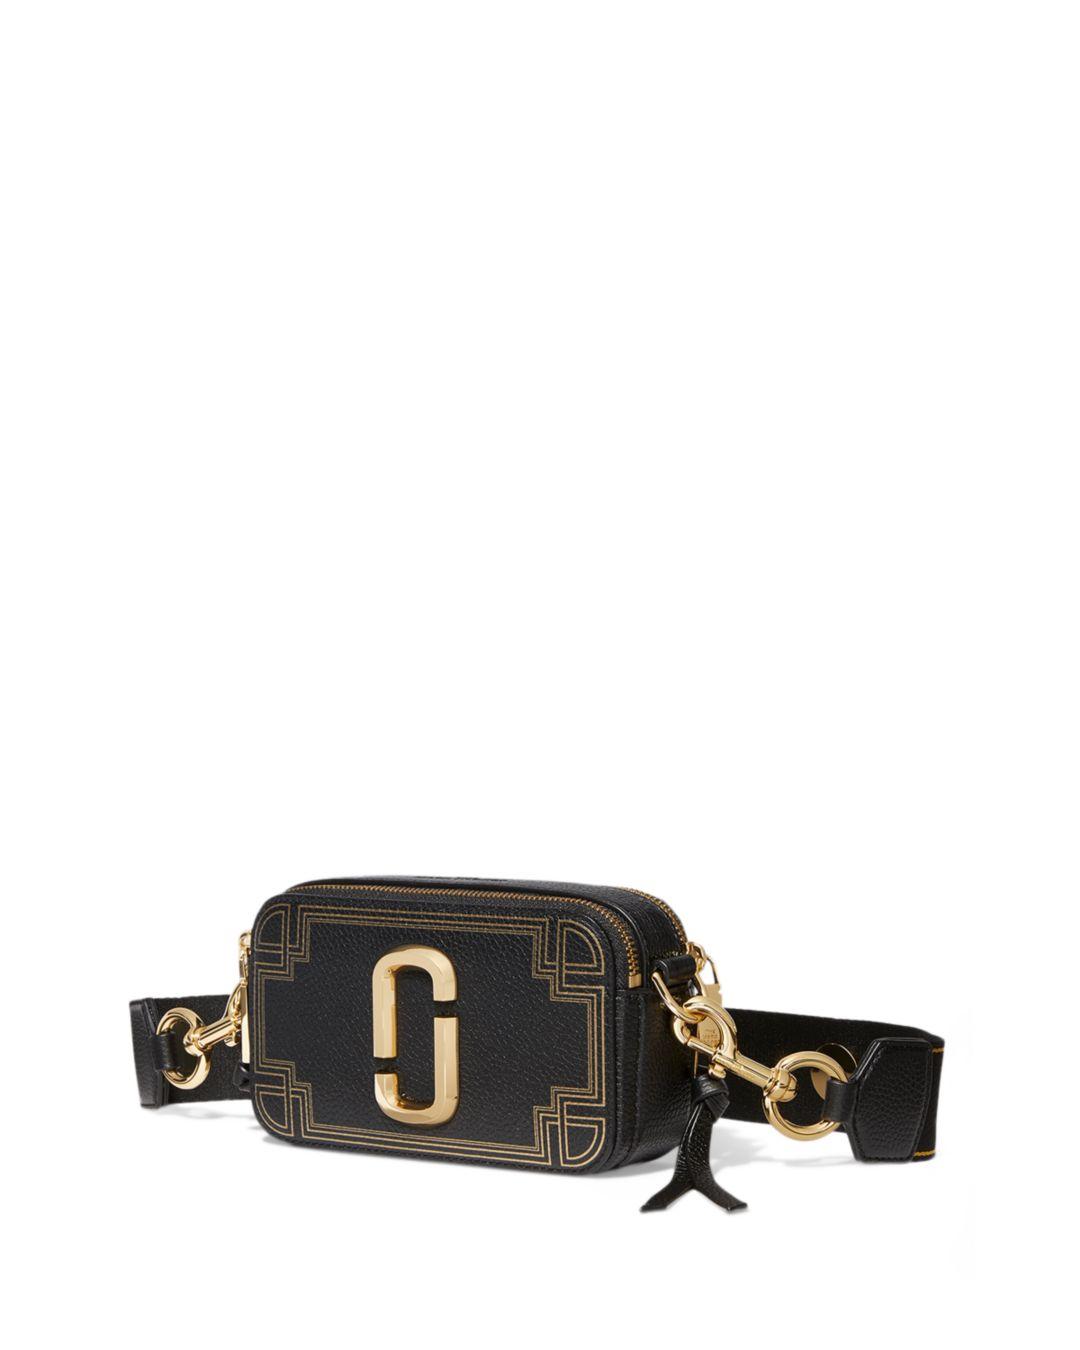 Marc Jacobs Leather The Snapshot Gilded Bag in Black - Lyst